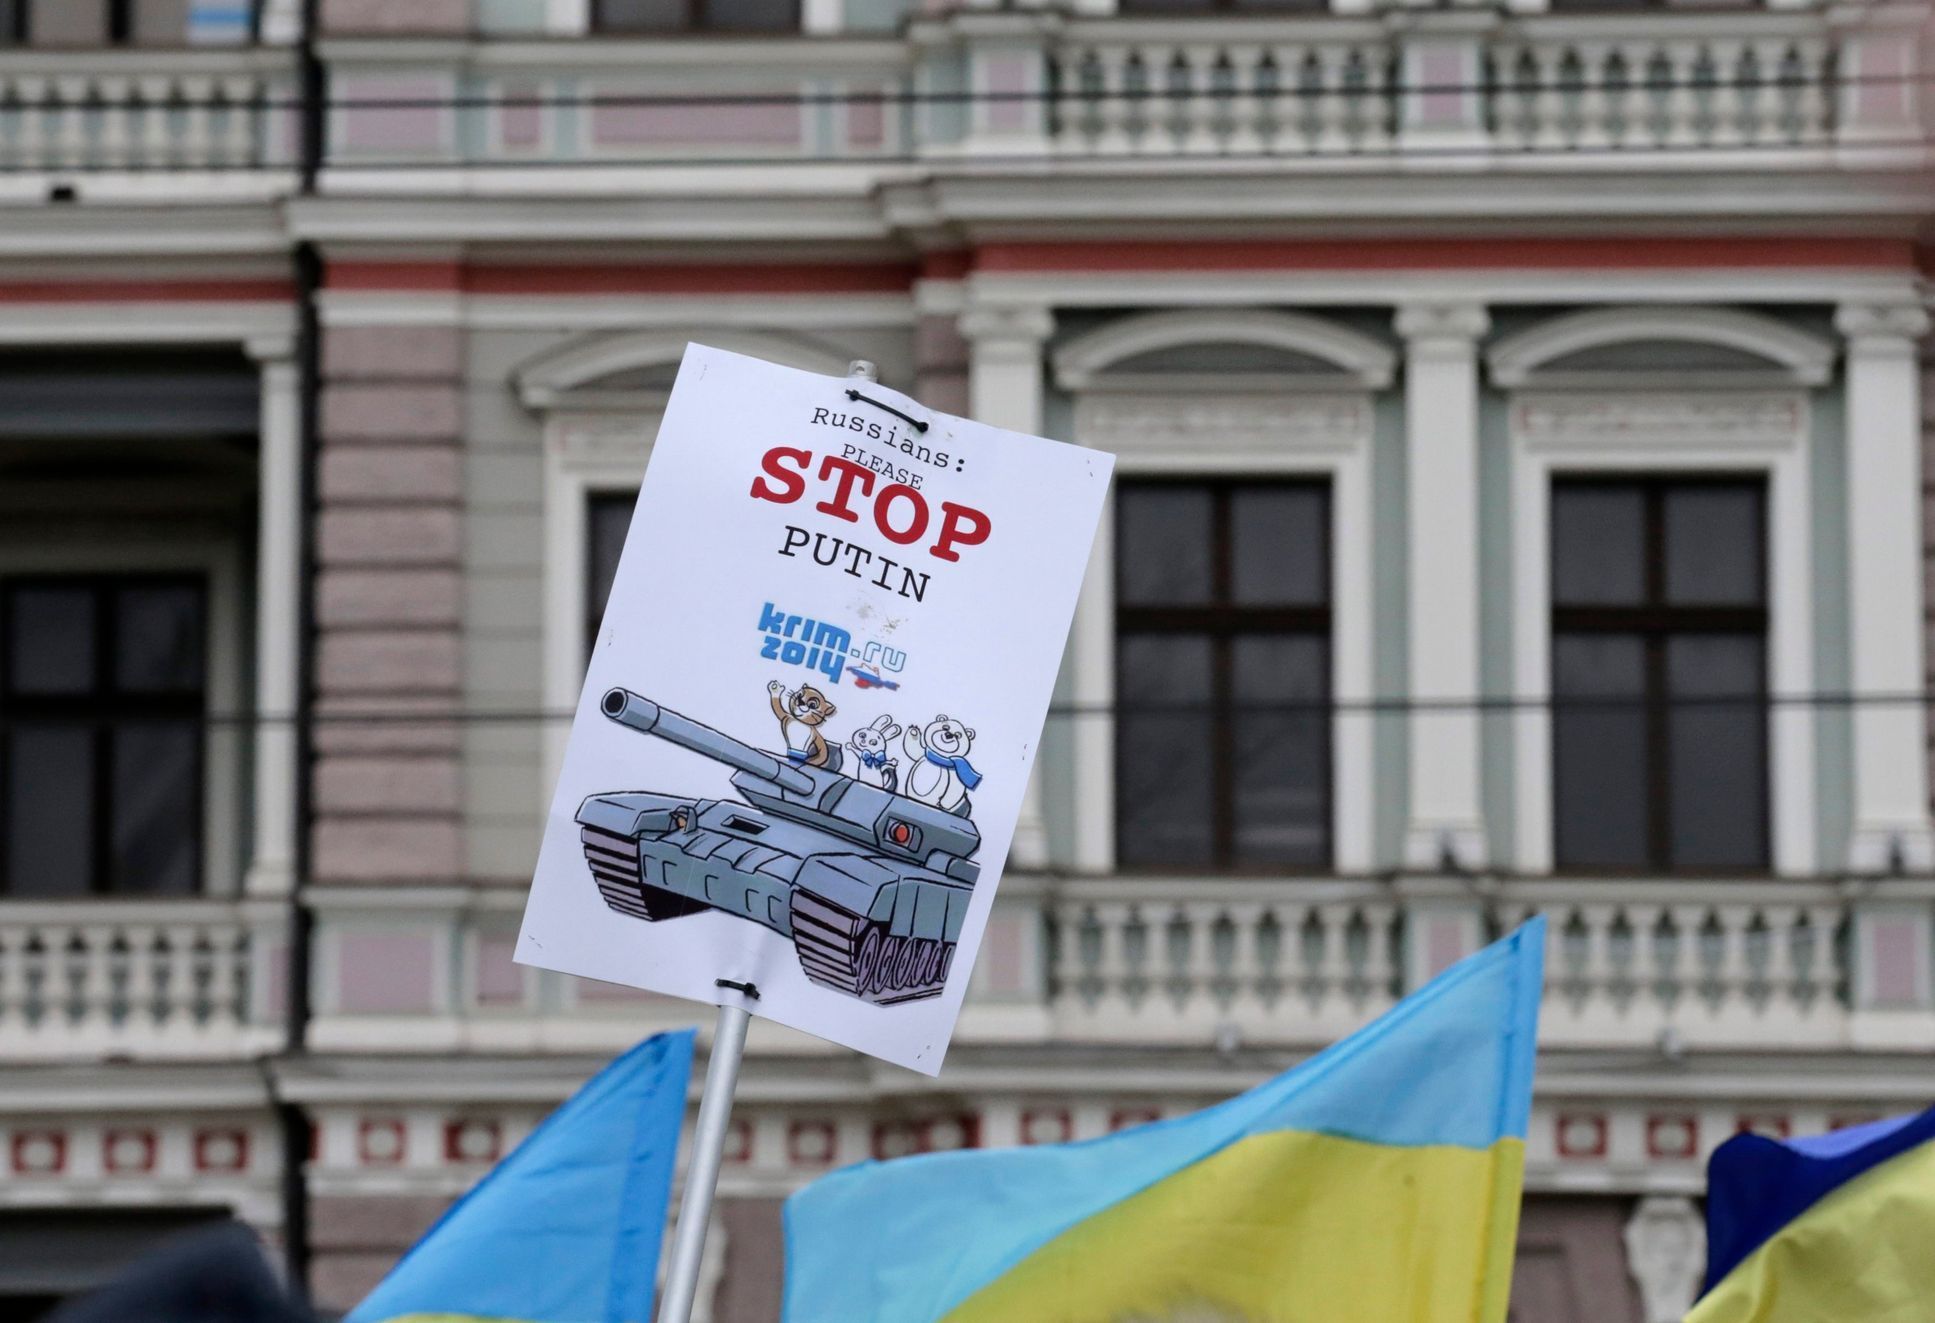 Ukraine's flags and a poster are pictured in front of Russia's embassy during a protest rally against Russian intervention in Crimea, in Riga